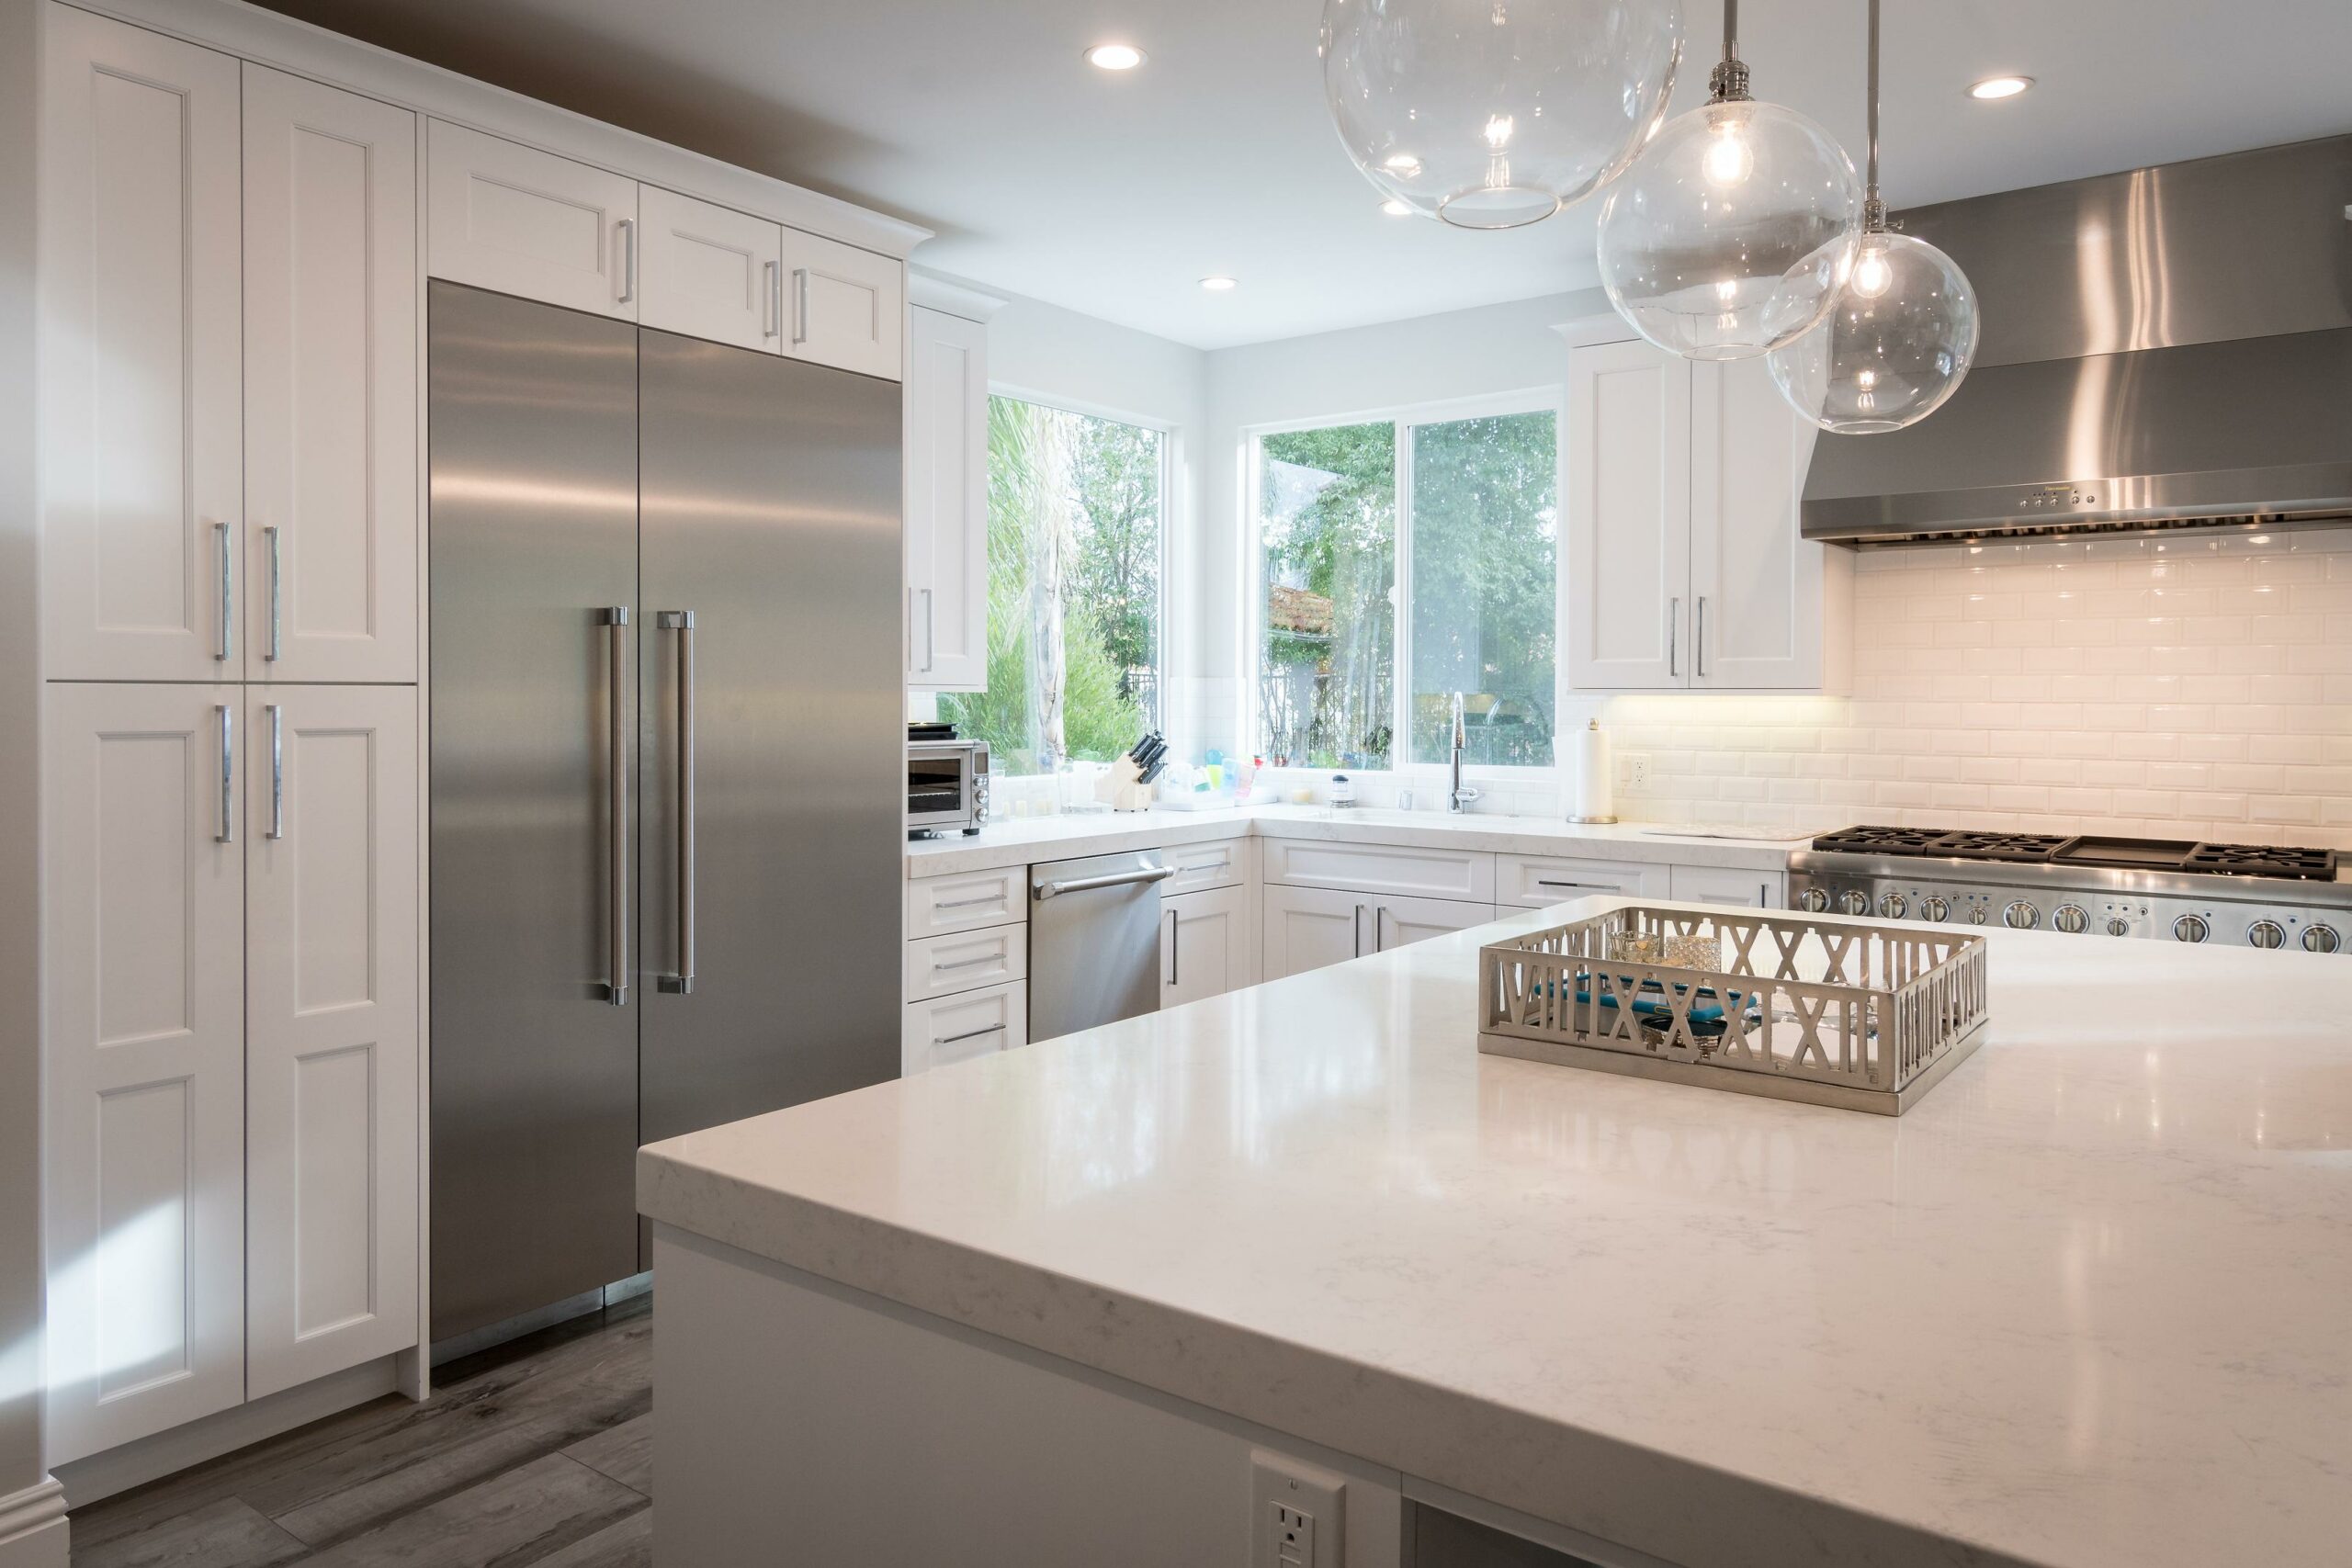 Modern kitchen with stainless steel appliances and white cabinets.